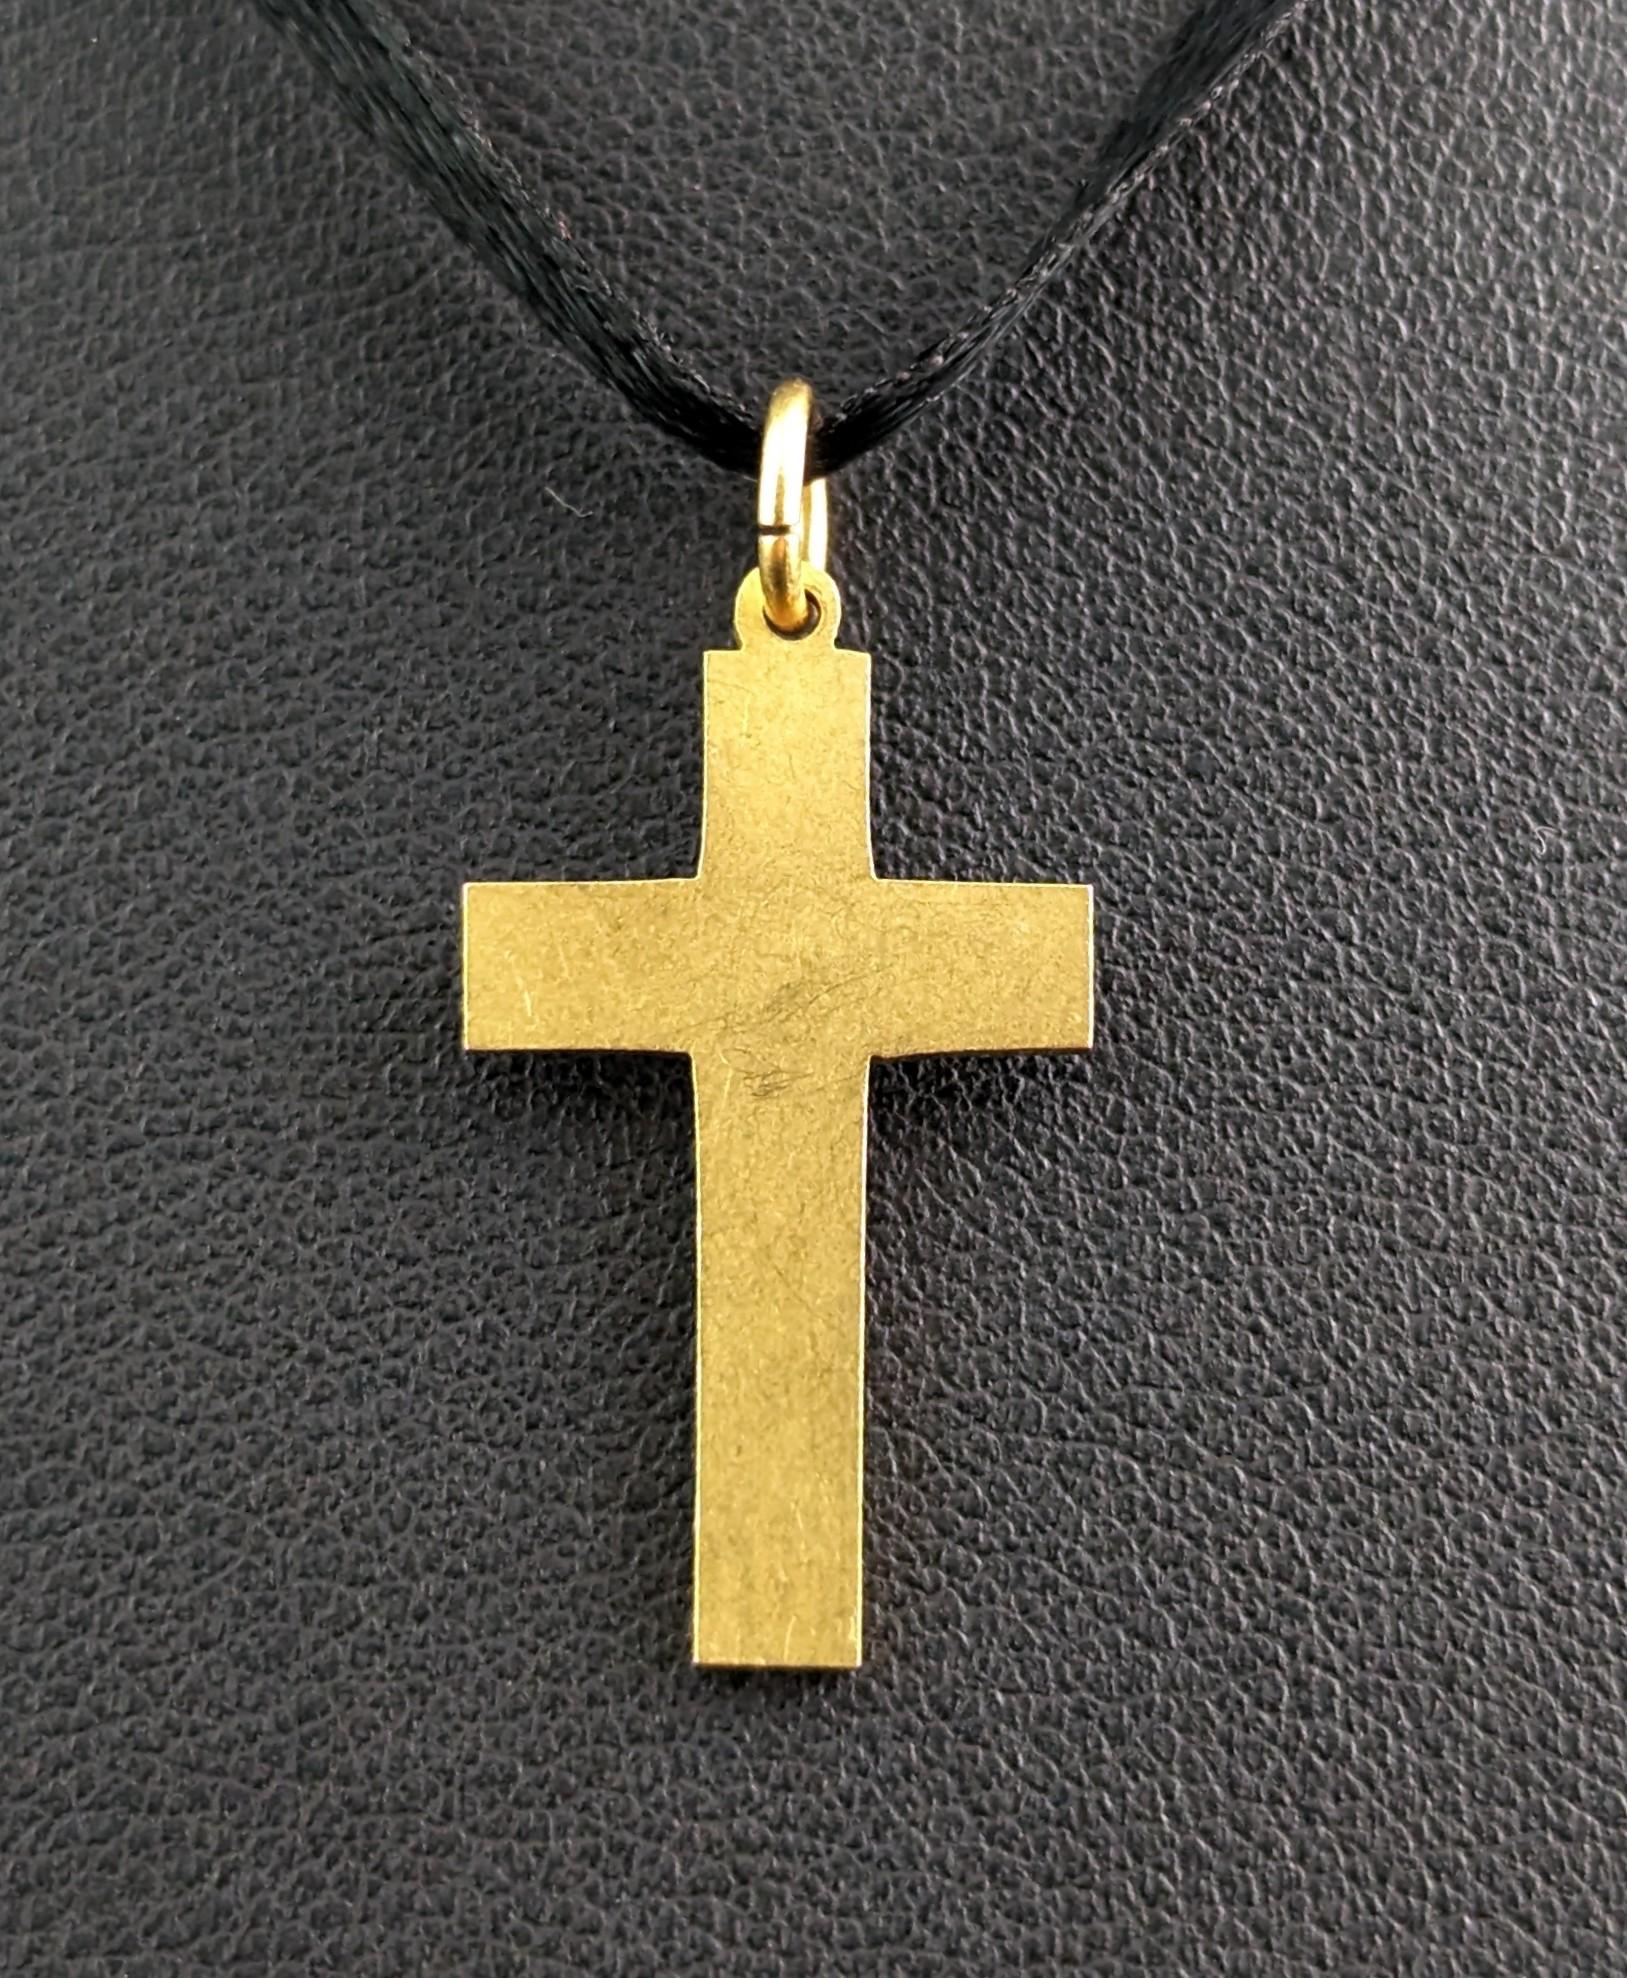 This sweet antique, 15ct yellow gold Cross pendant is truly unique being hand cut by master jewellers from the past.

This gives it such a beautiful touch as the craftsmanship of the original jeweller can still be felt in the piece.

It is a dainty